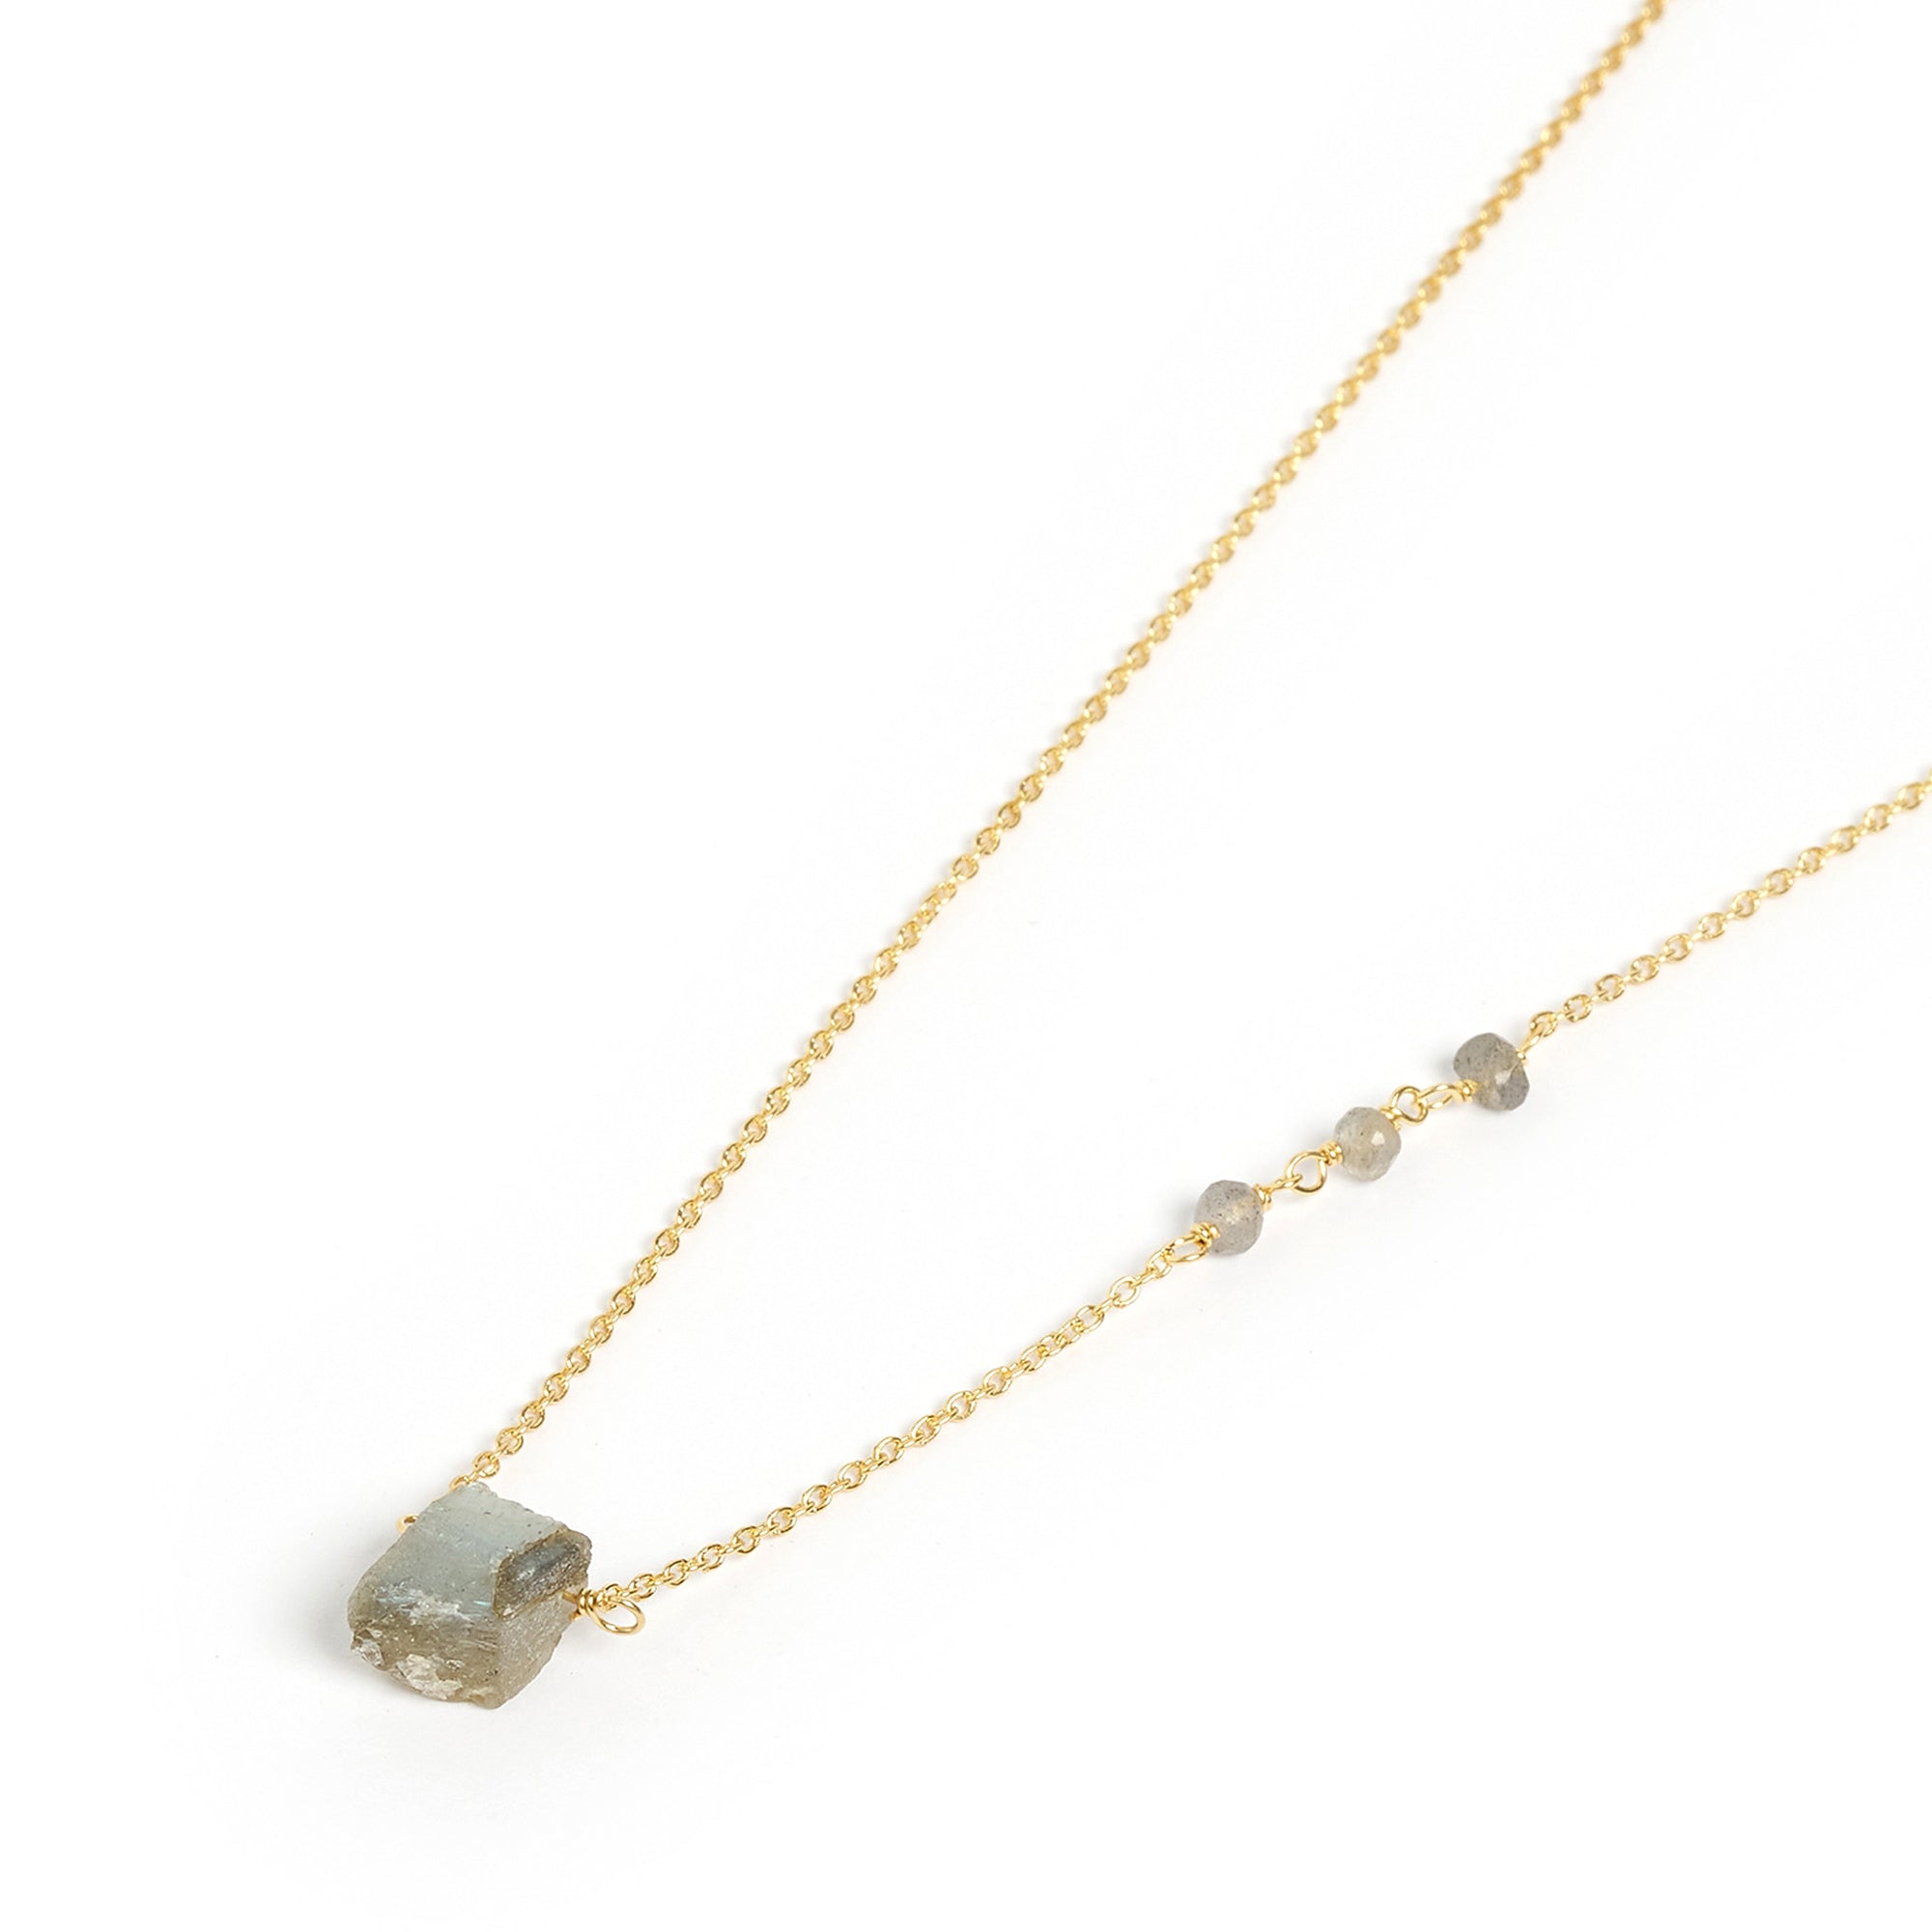 Arms Of Eve magical Labrodite gold chain necklace with a cube-shaped stone pendant